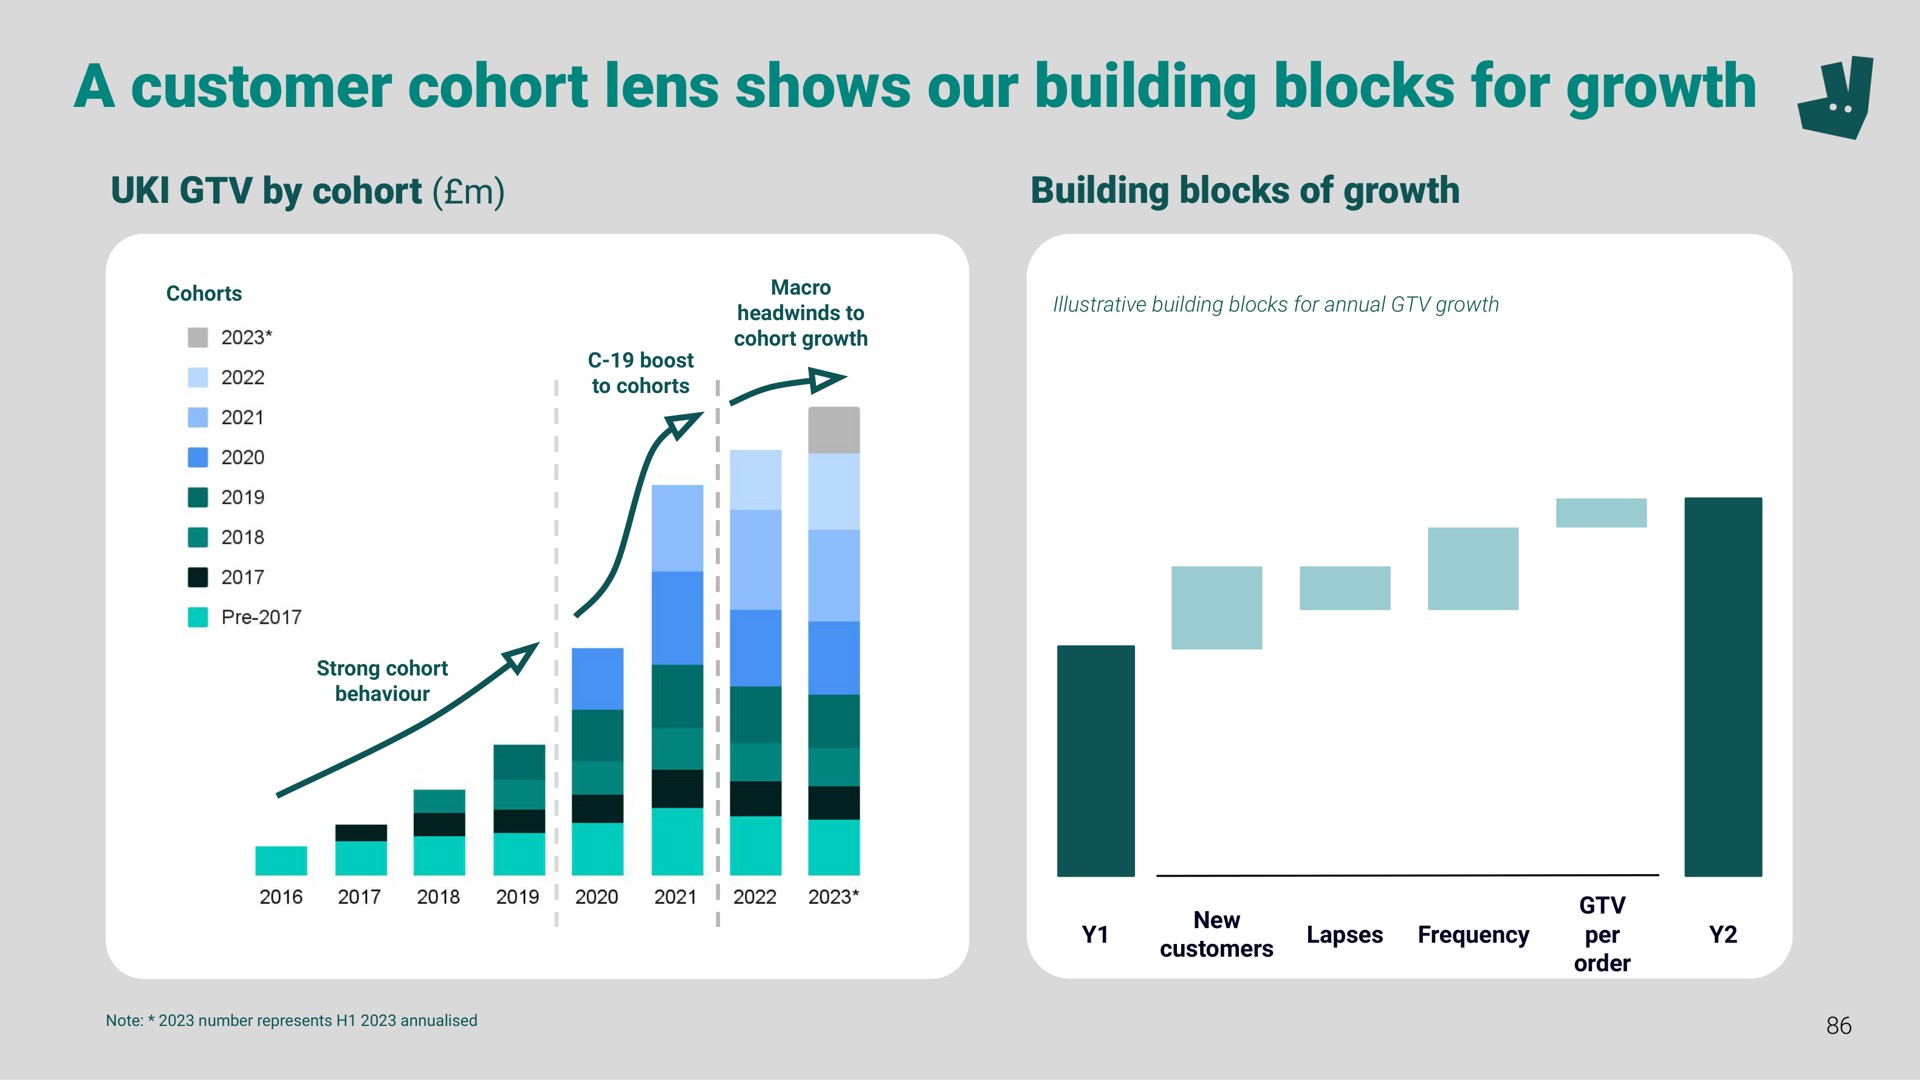 a customer cohort lens shows our building blocks for growth | Deliveroo